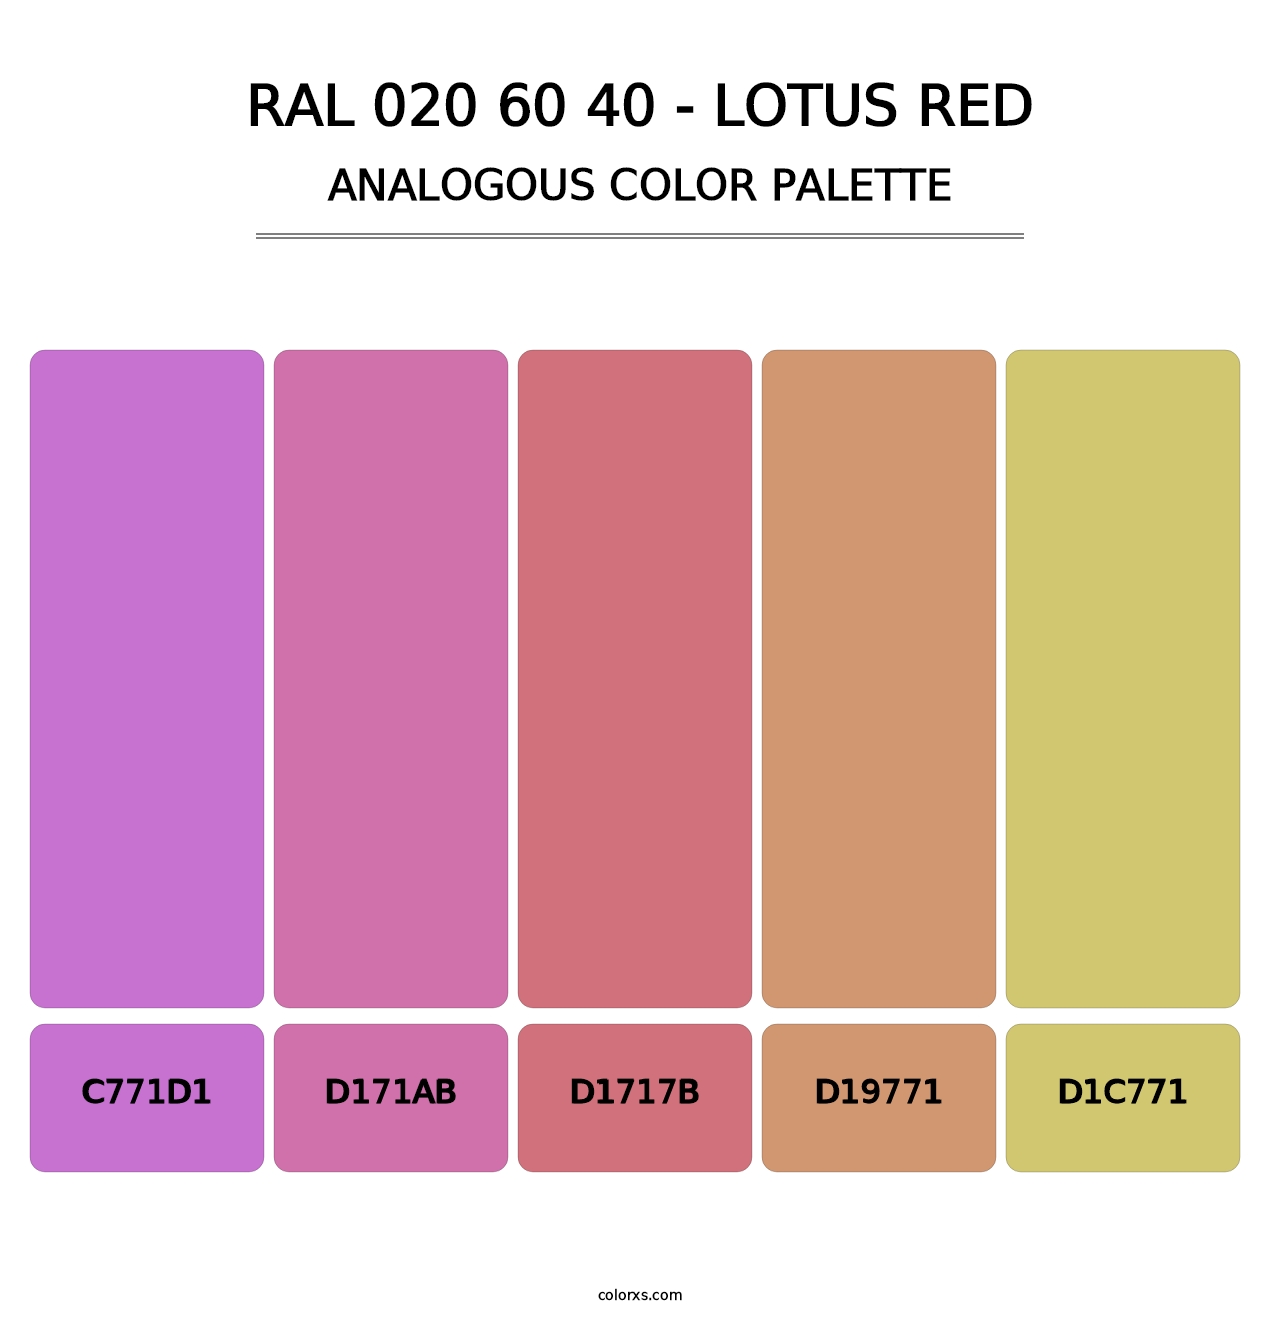 RAL 020 60 40 - Lotus Red - Analogous Color Palette